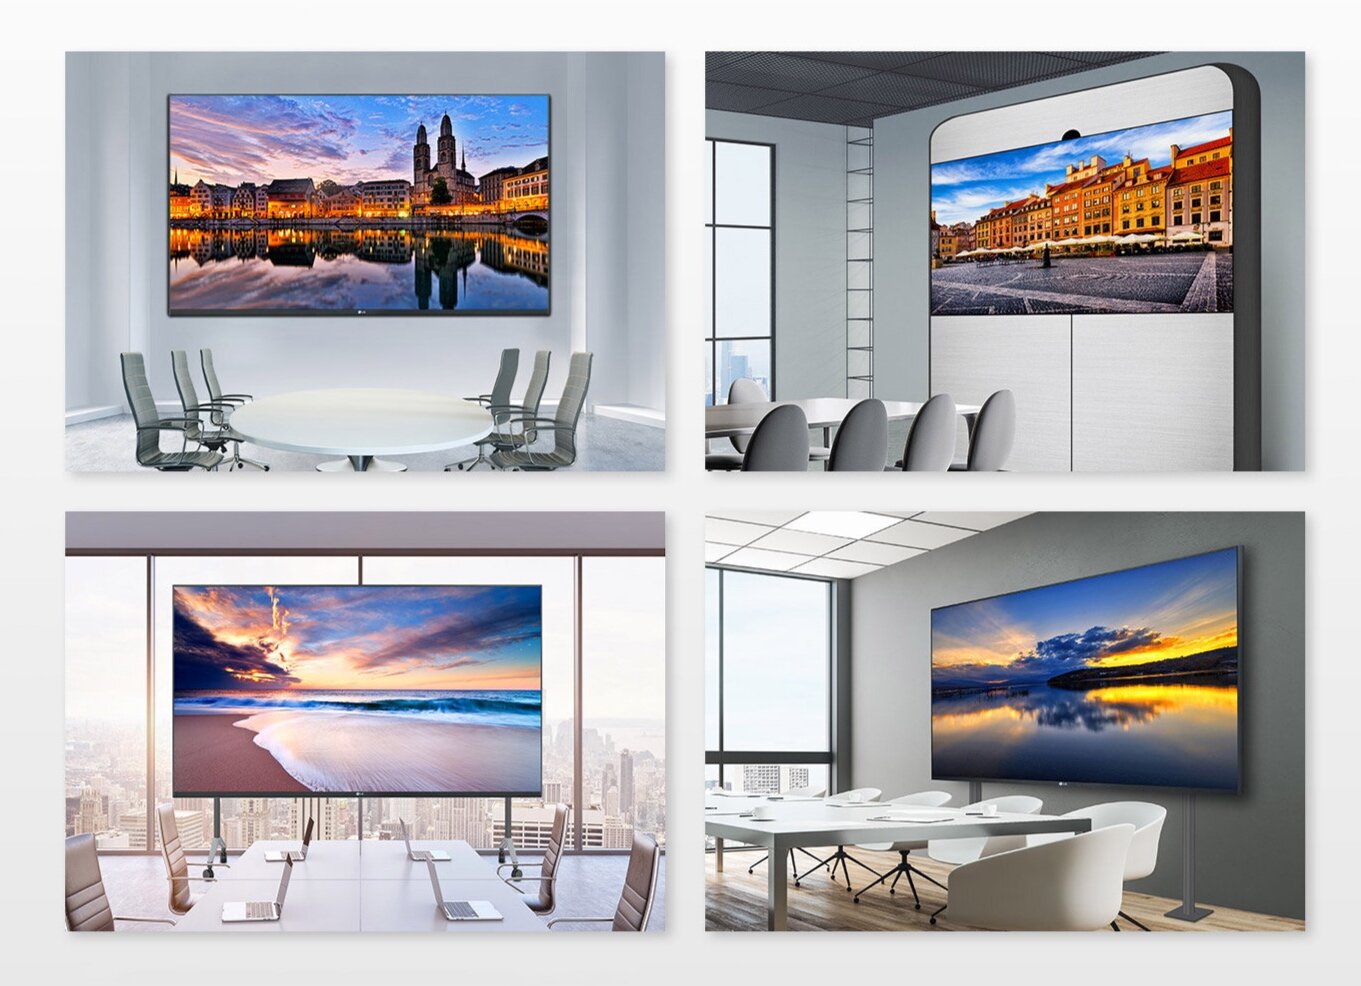 The 130" All-in-one LED Screen can be easily installed in various environment setups depending on the user’s preference.